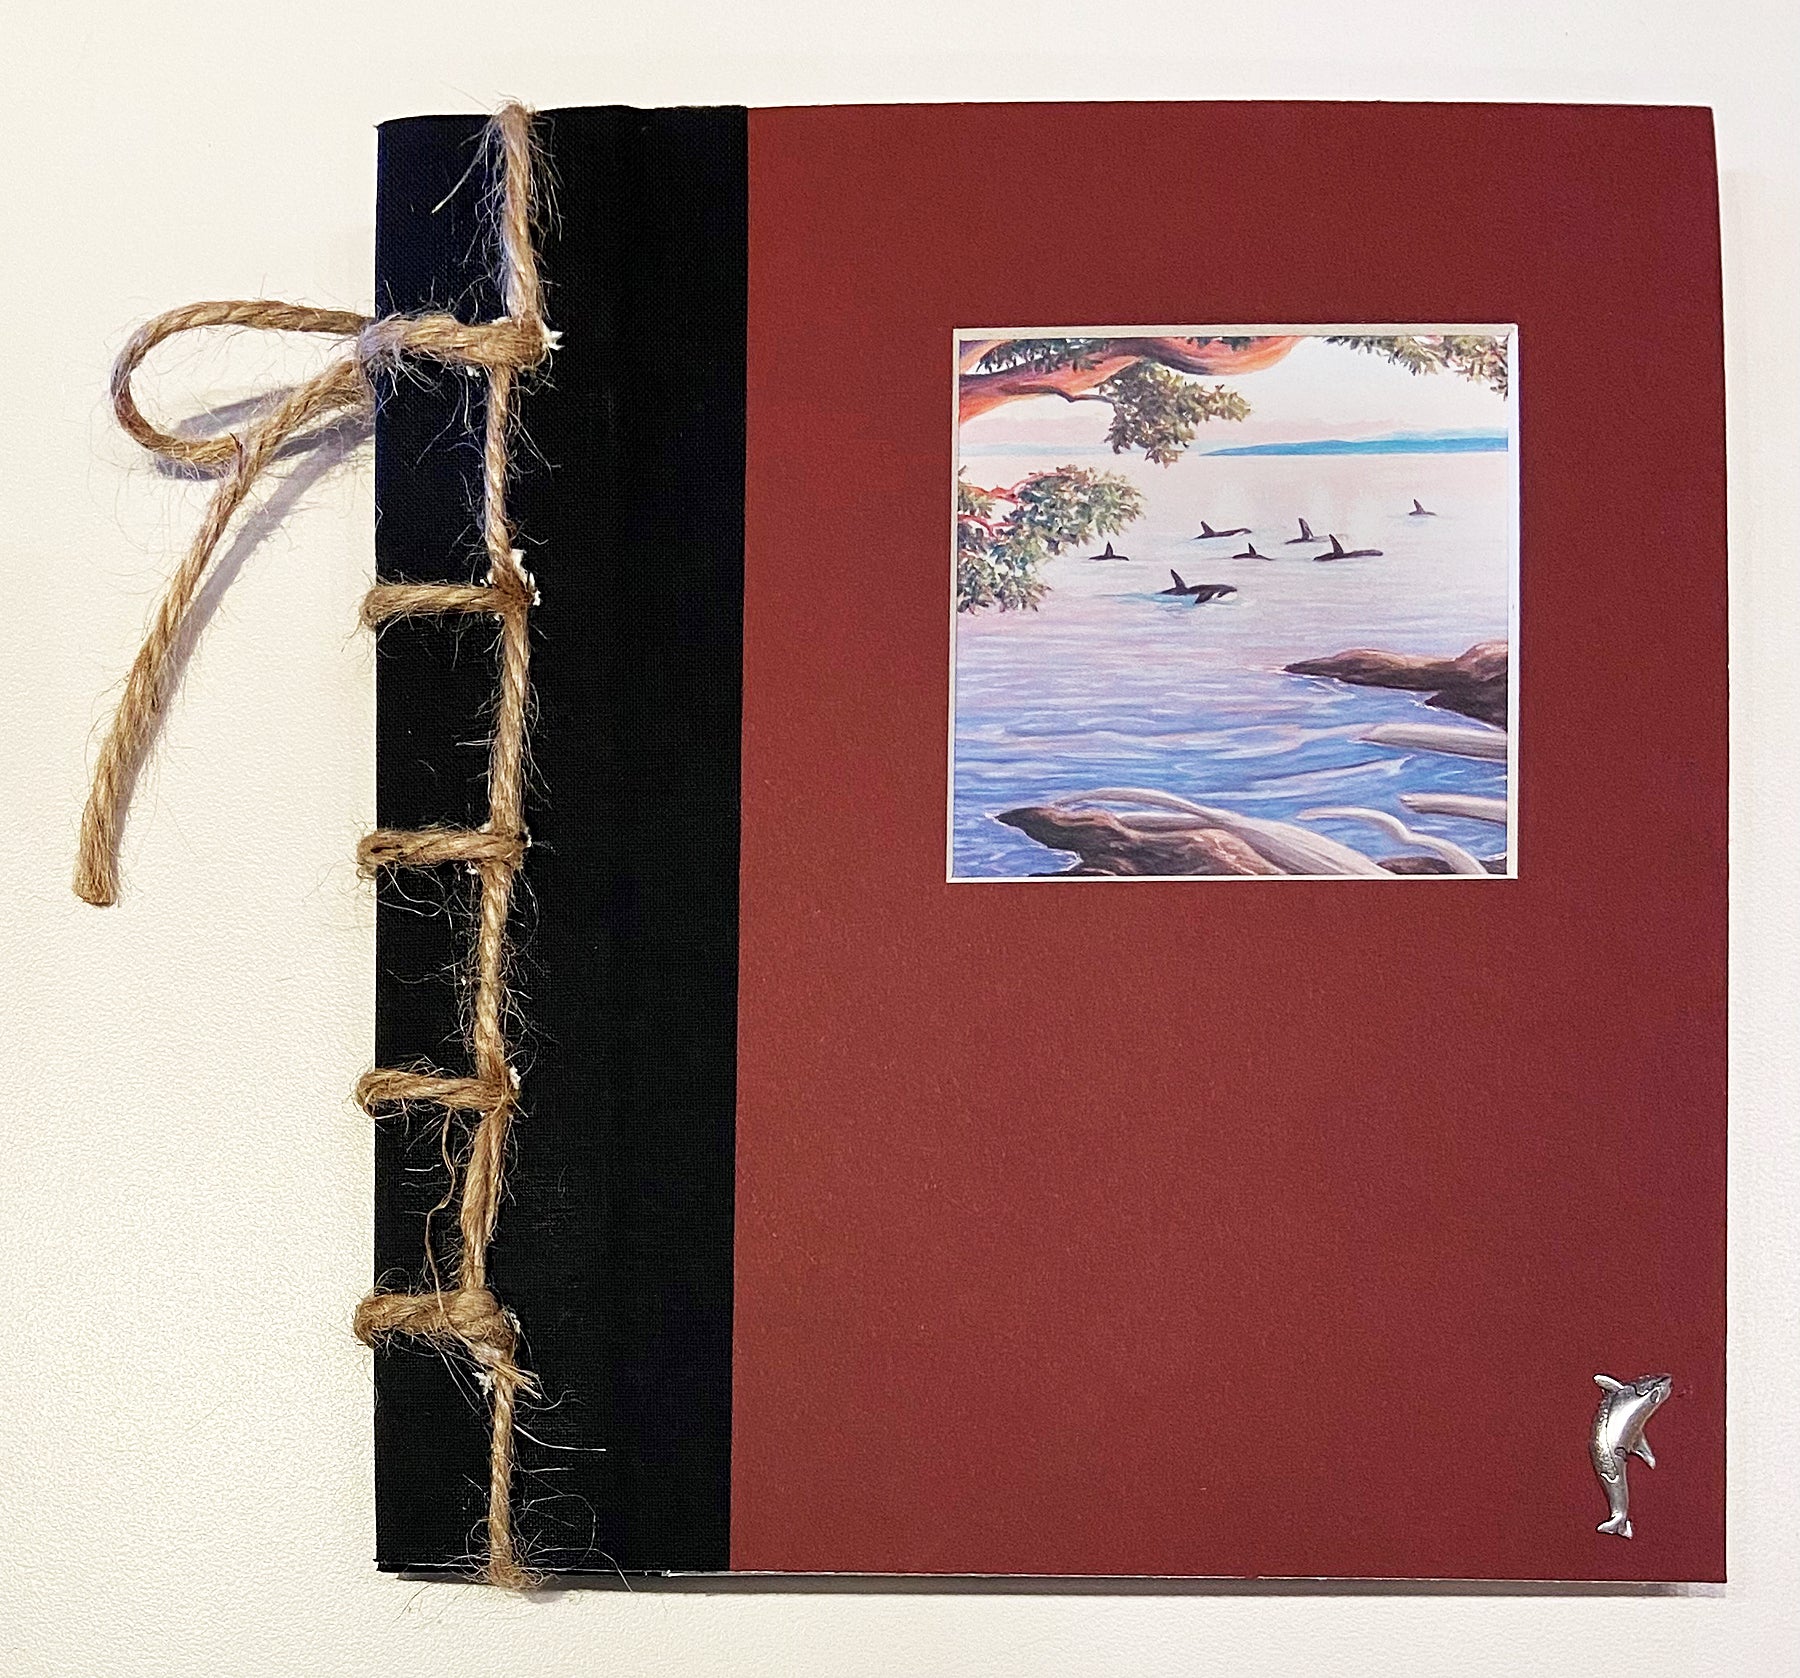 Hand Crafted Journal by Nancy Spaulding